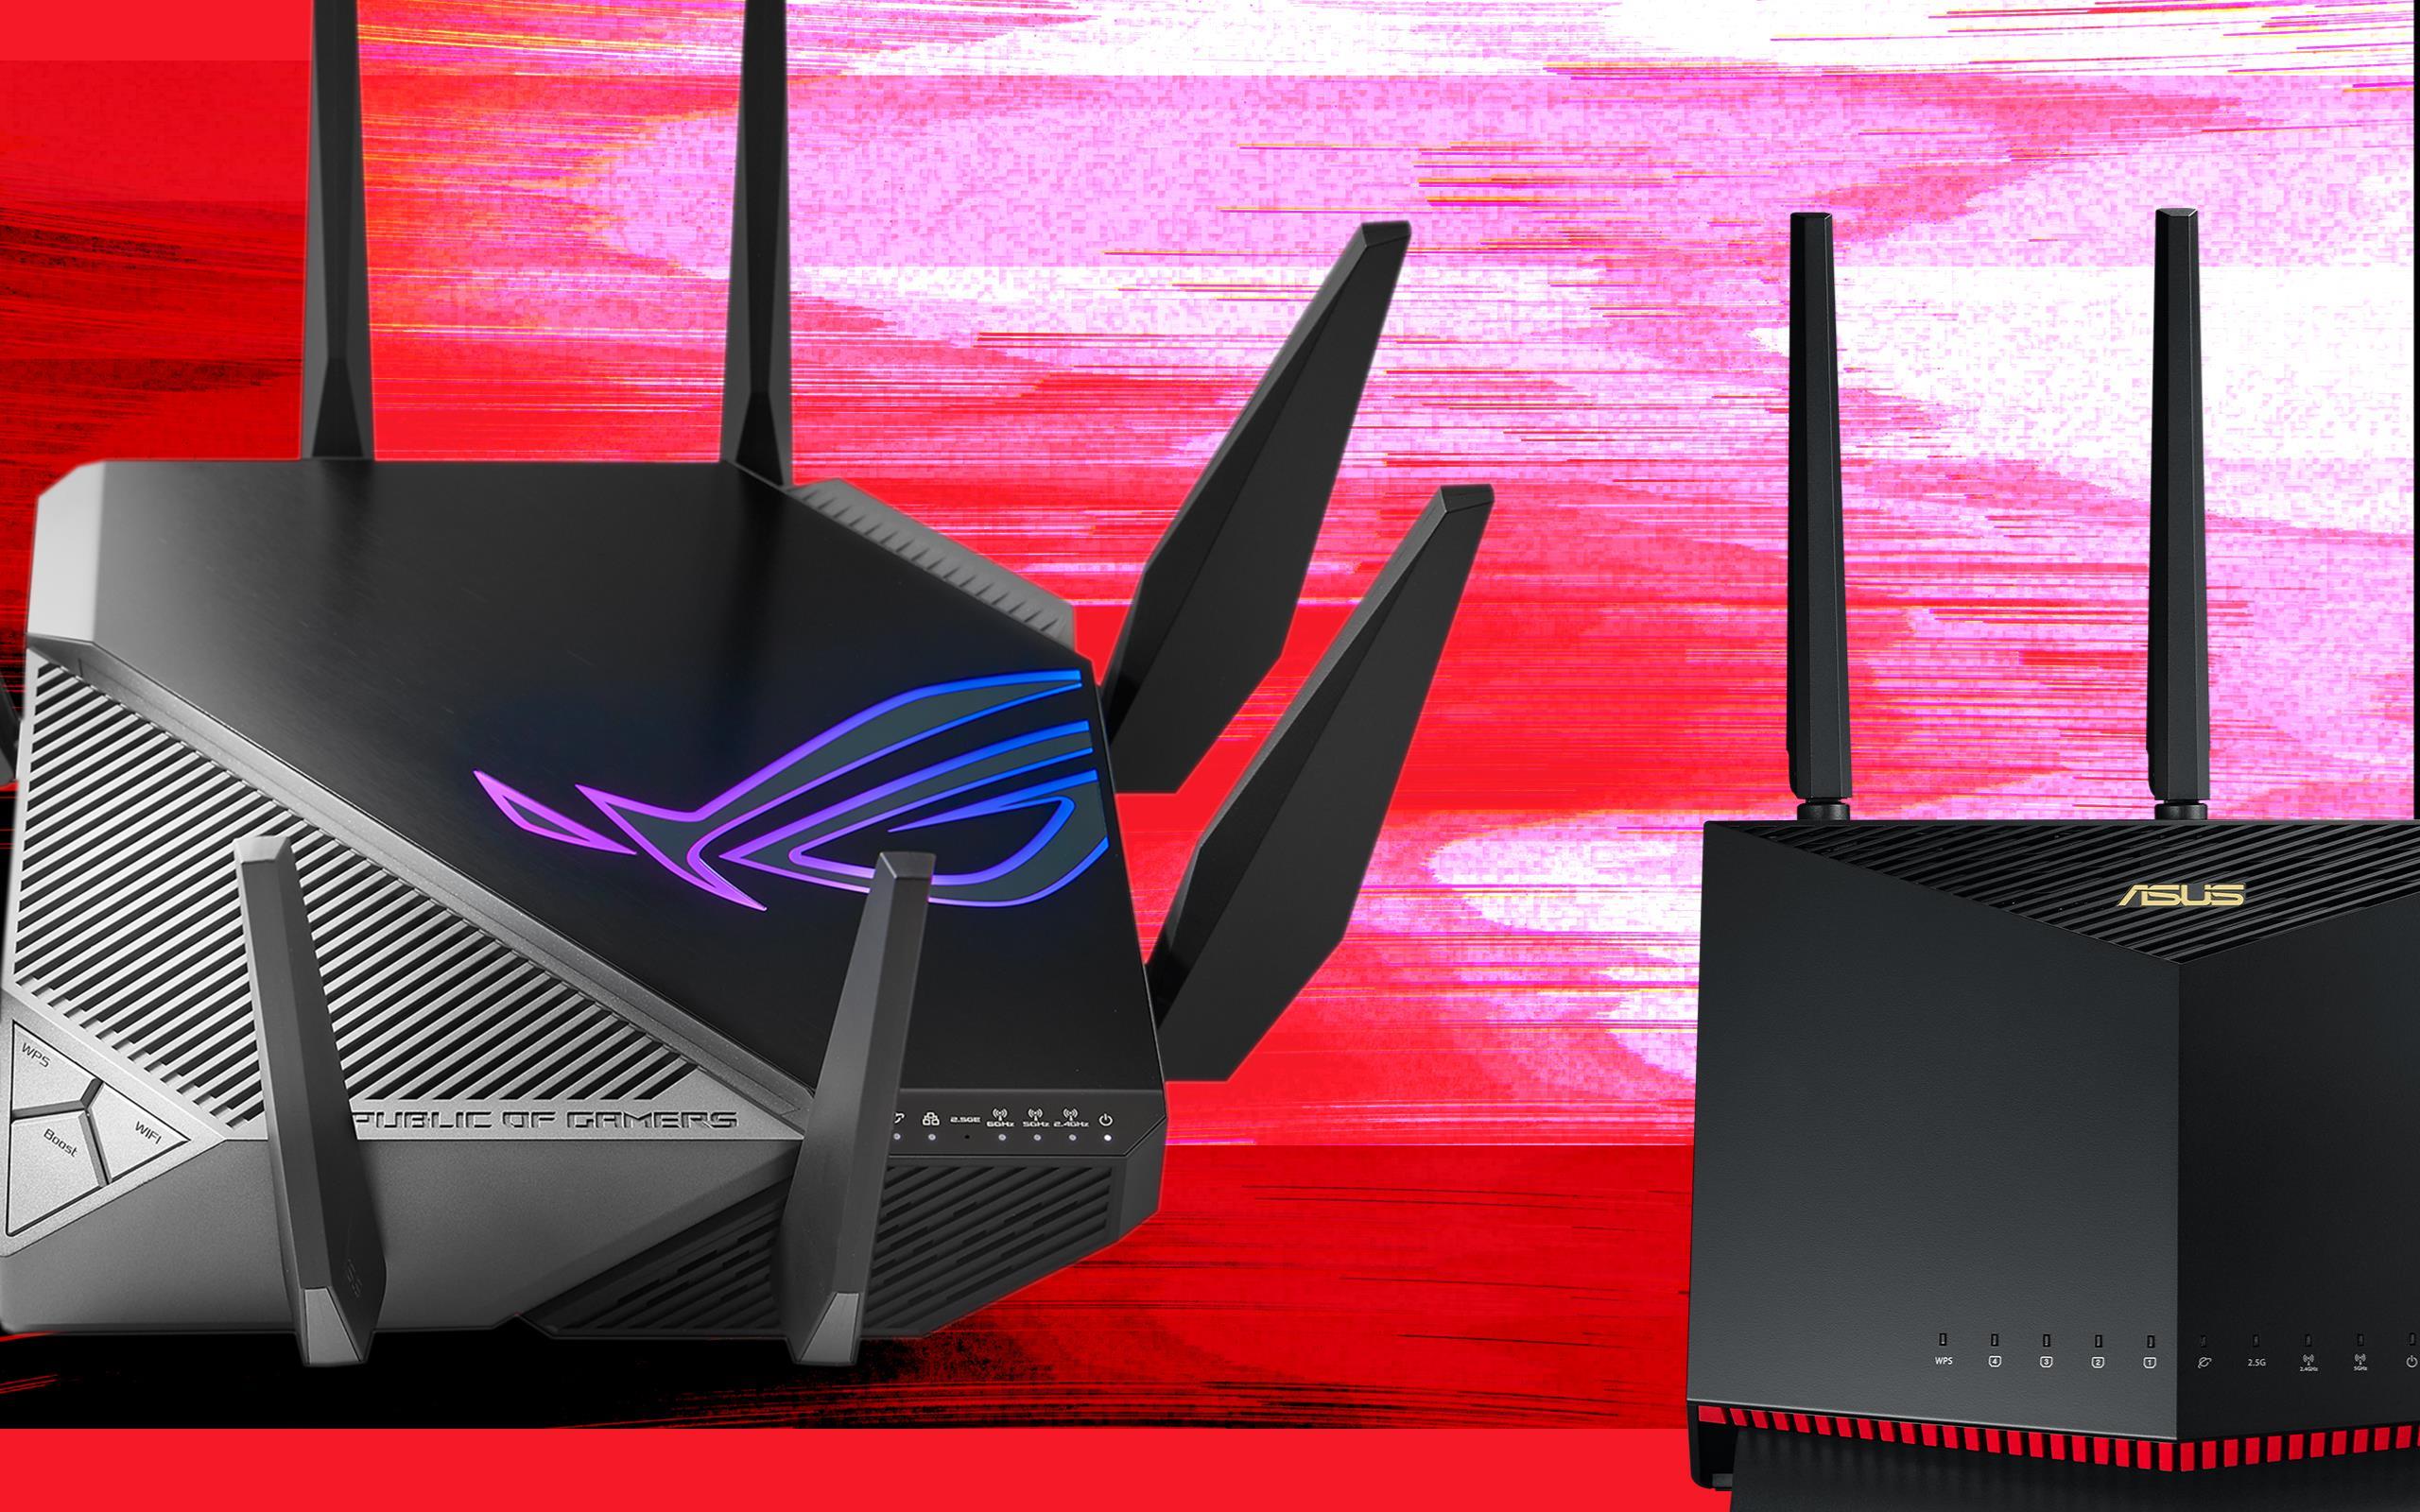 asus-gaming-routers-all-models-wifi-routers-asus-singapore